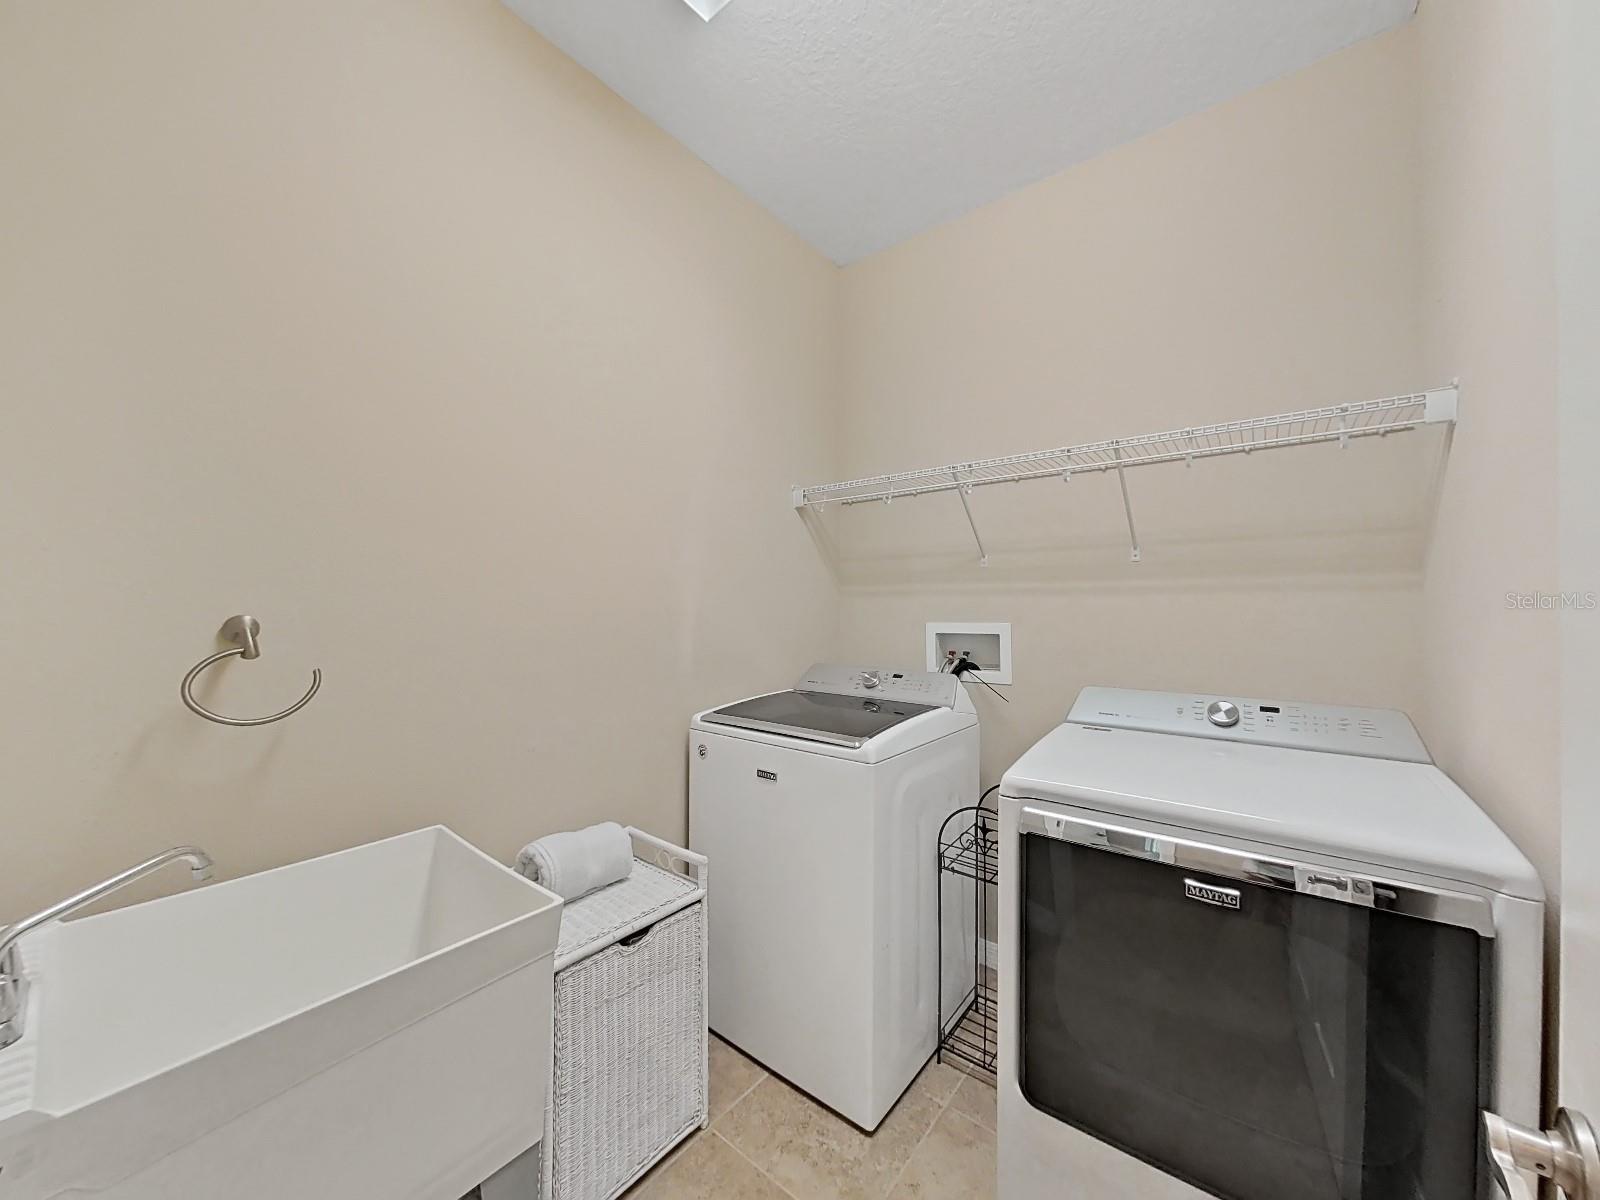 Convenient Laundry Room with Tub AND Appliances